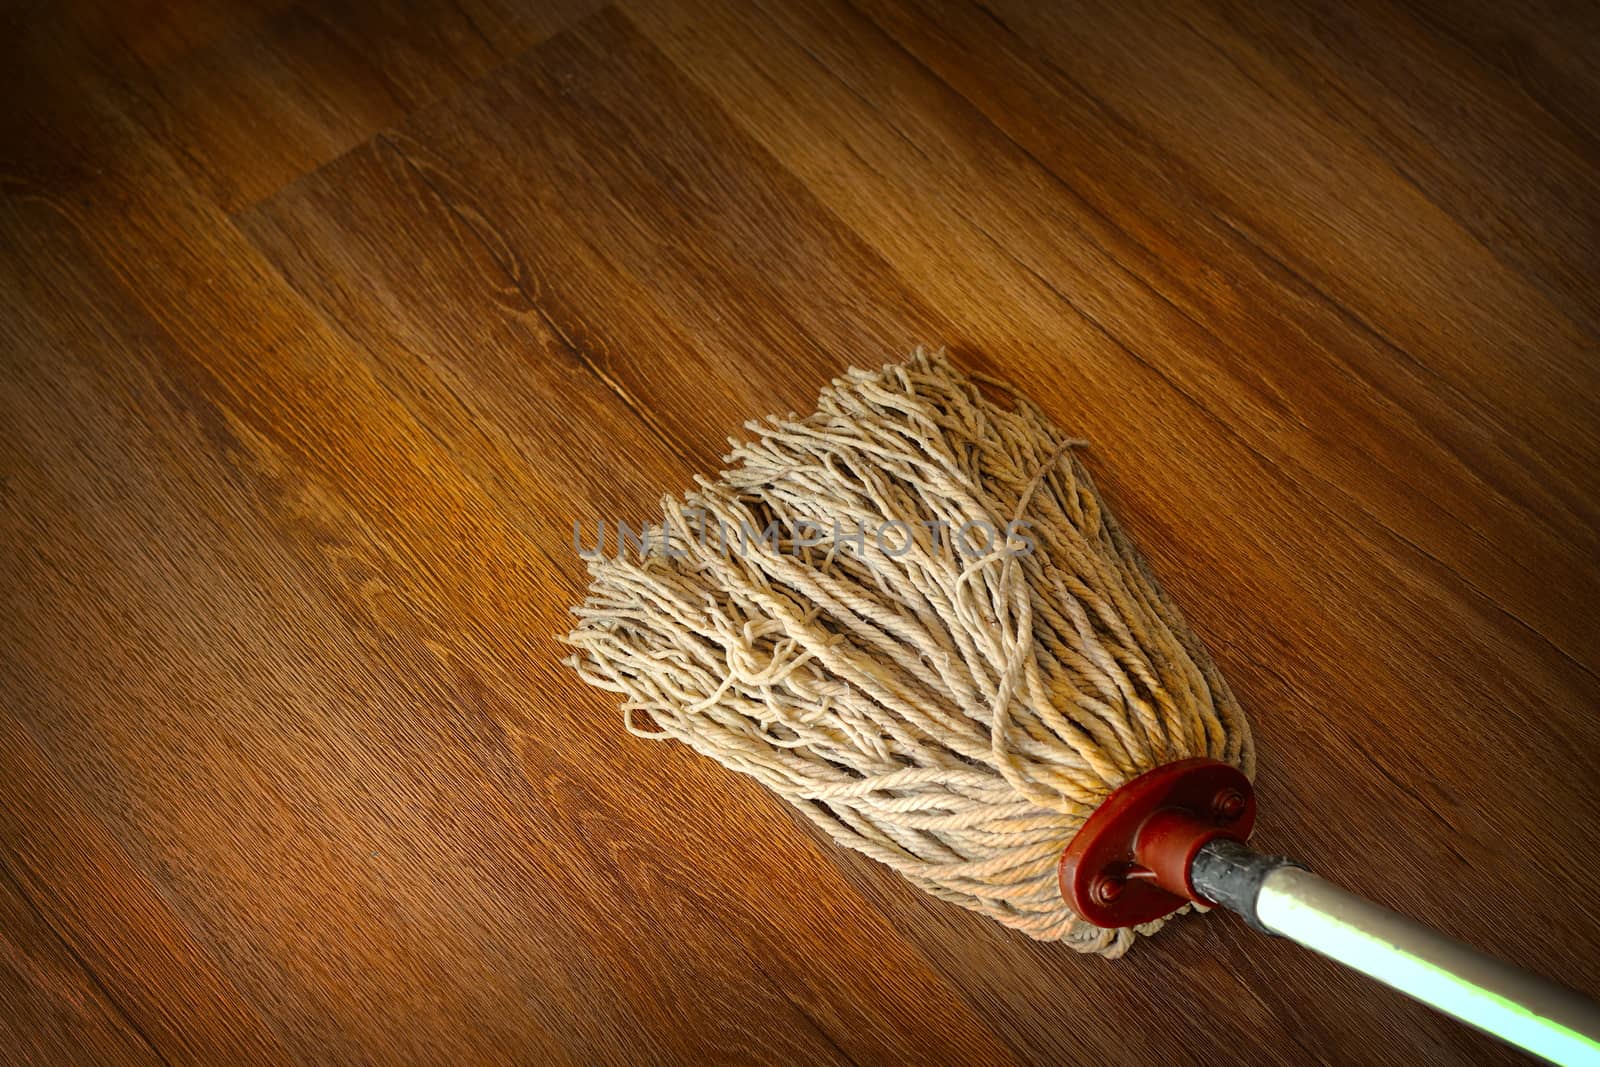 washing the wood floor with an old used mop